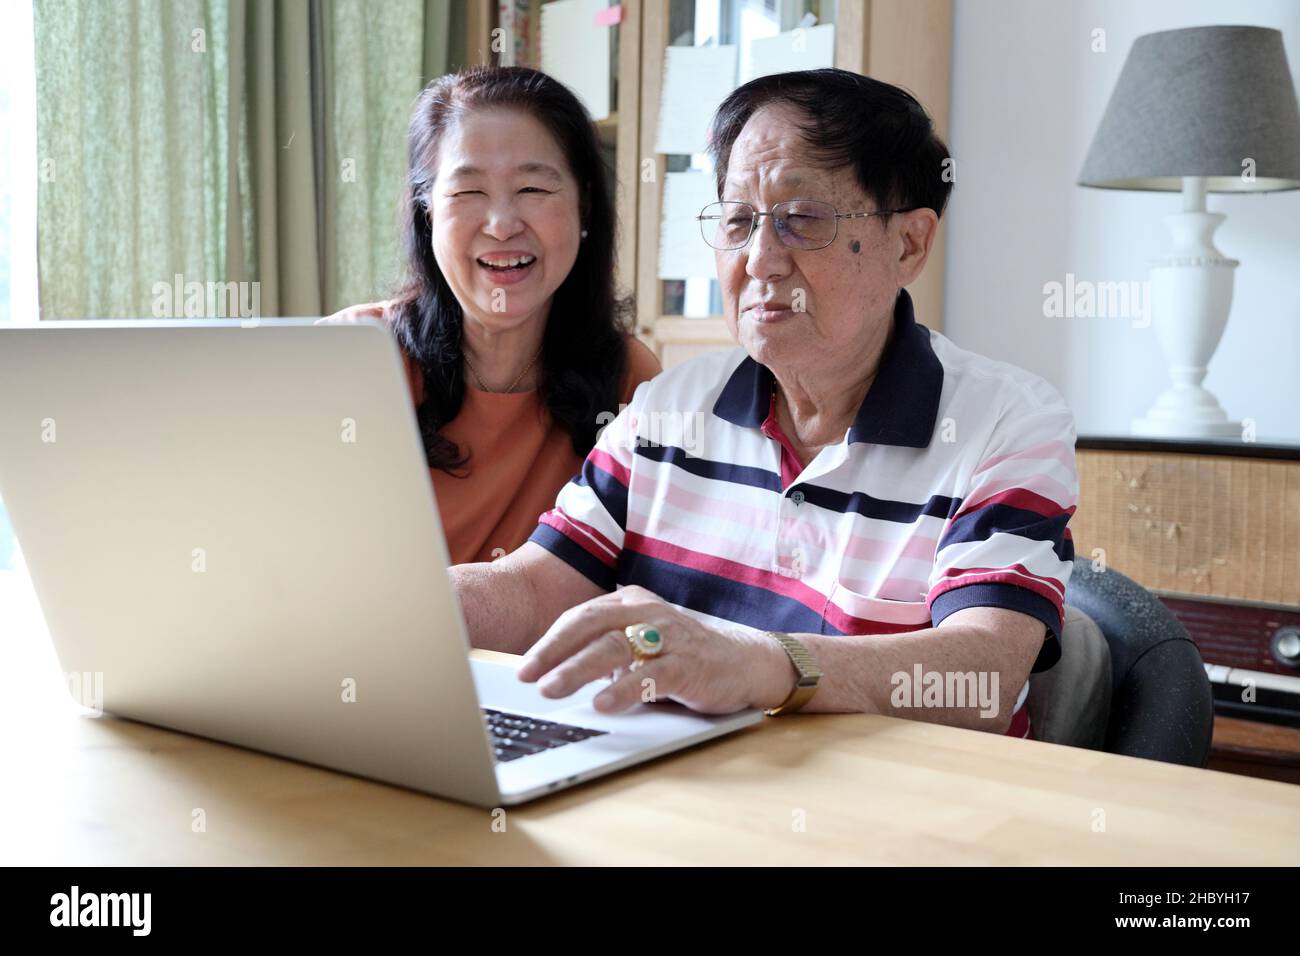 The couple Asian using laptop in the house. Stock Photo